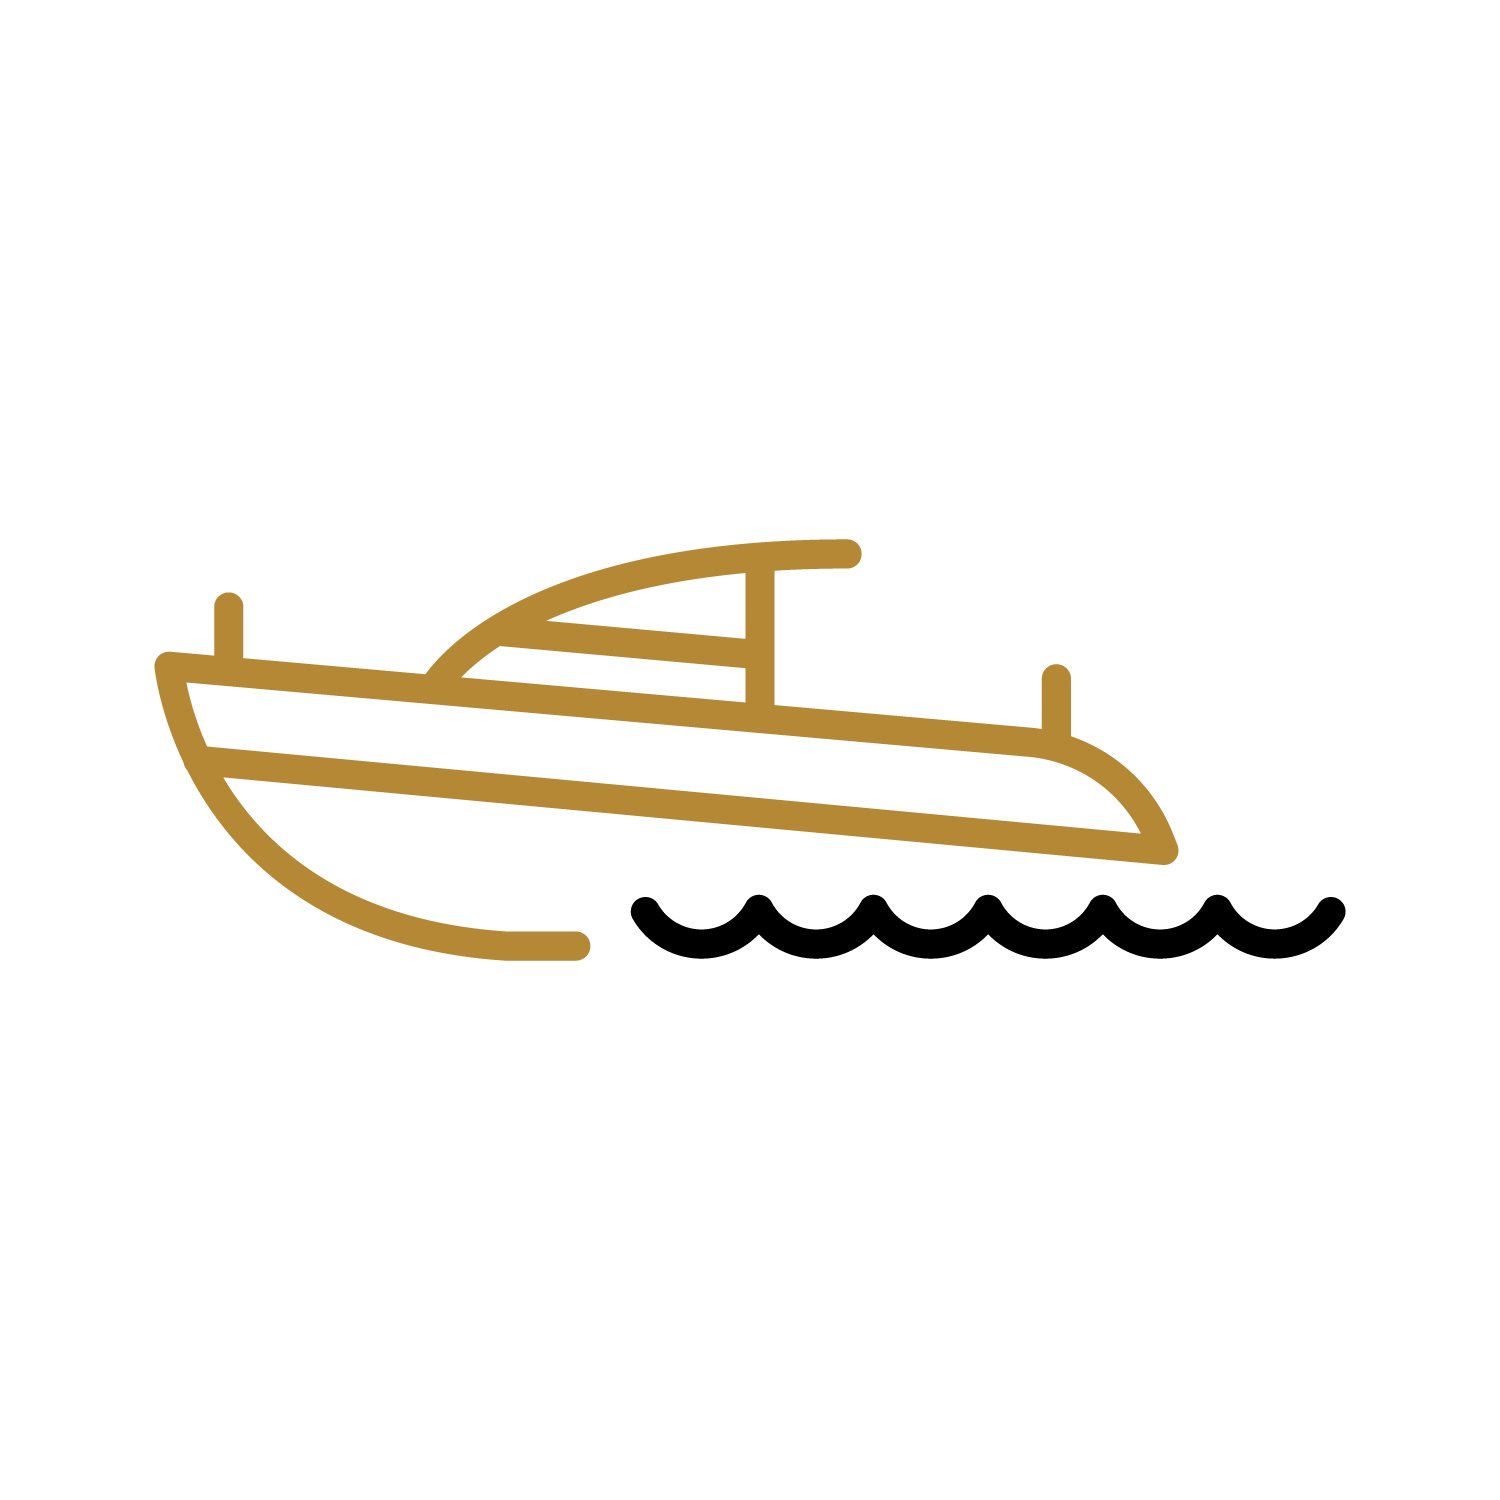 gold boat with black water underneath it